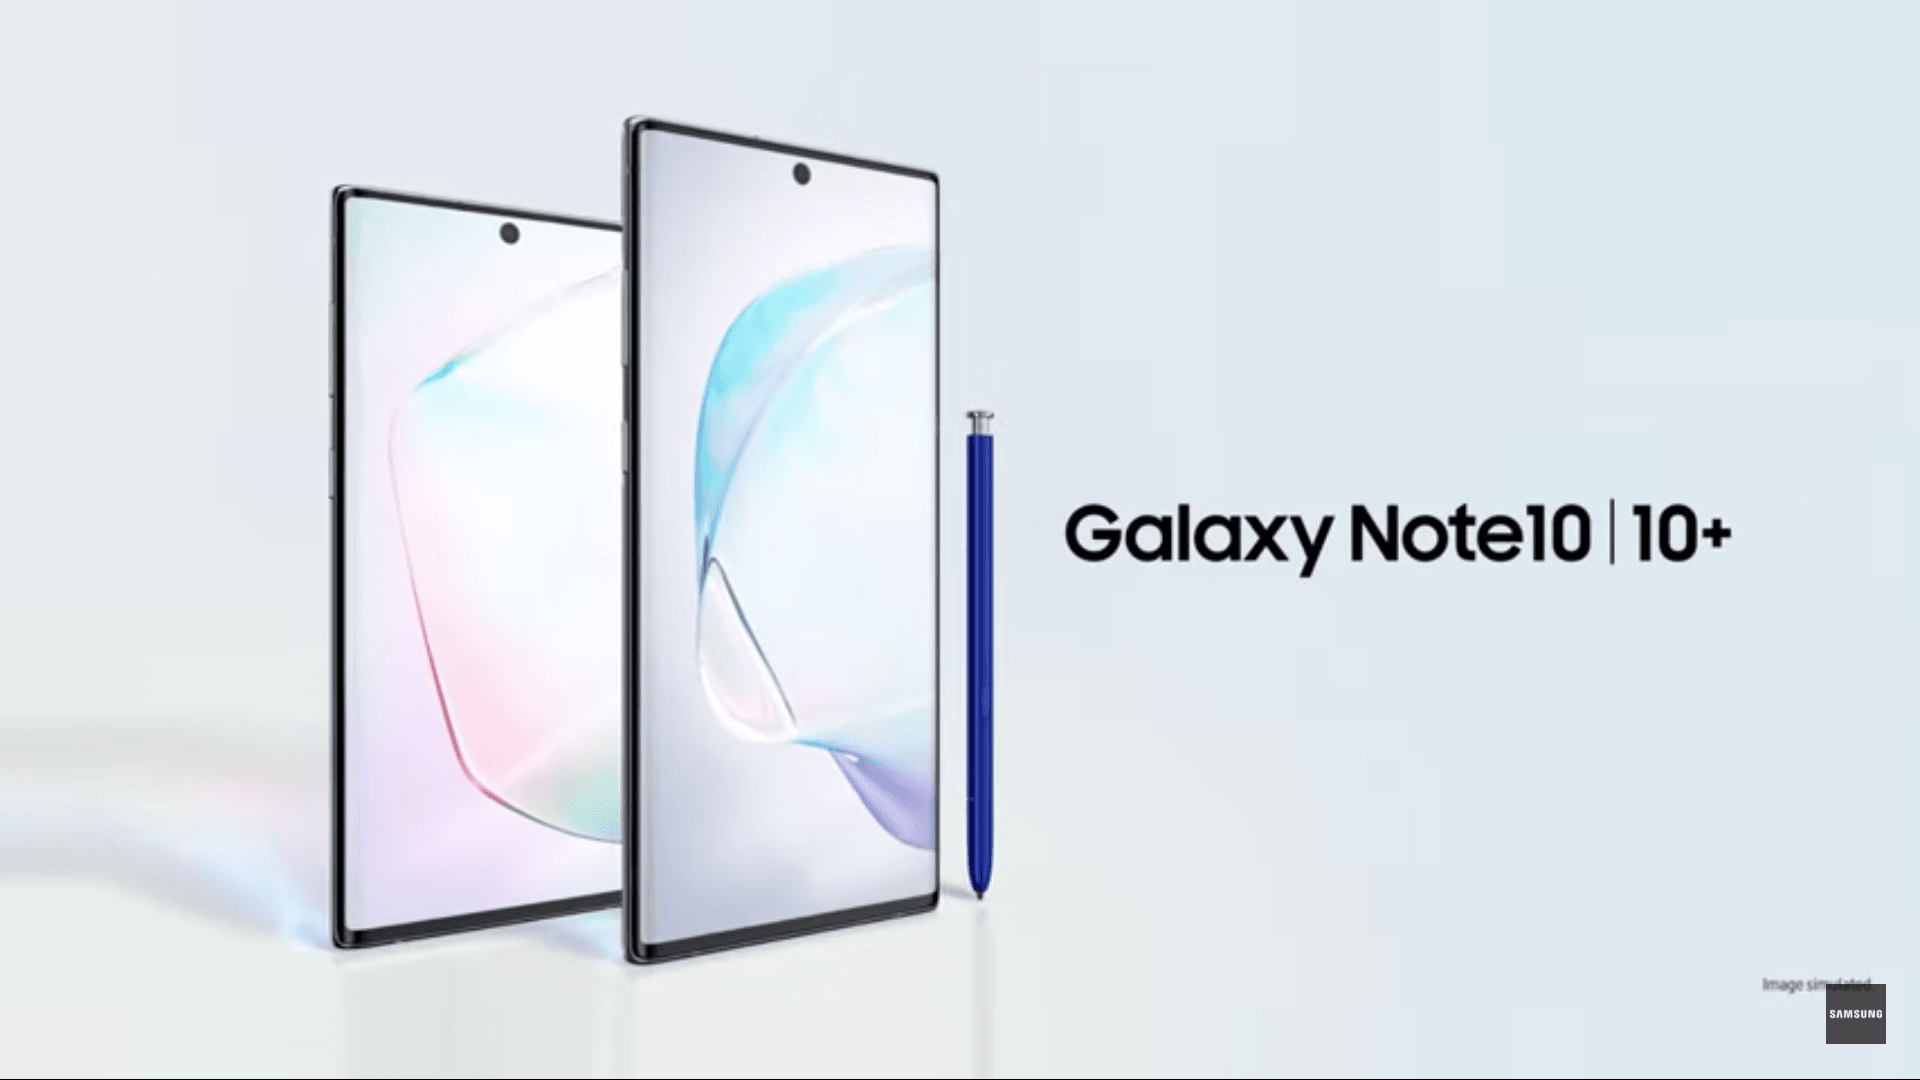 Download Galaxy Note 10 Wallpapers Here Now [LINKS]